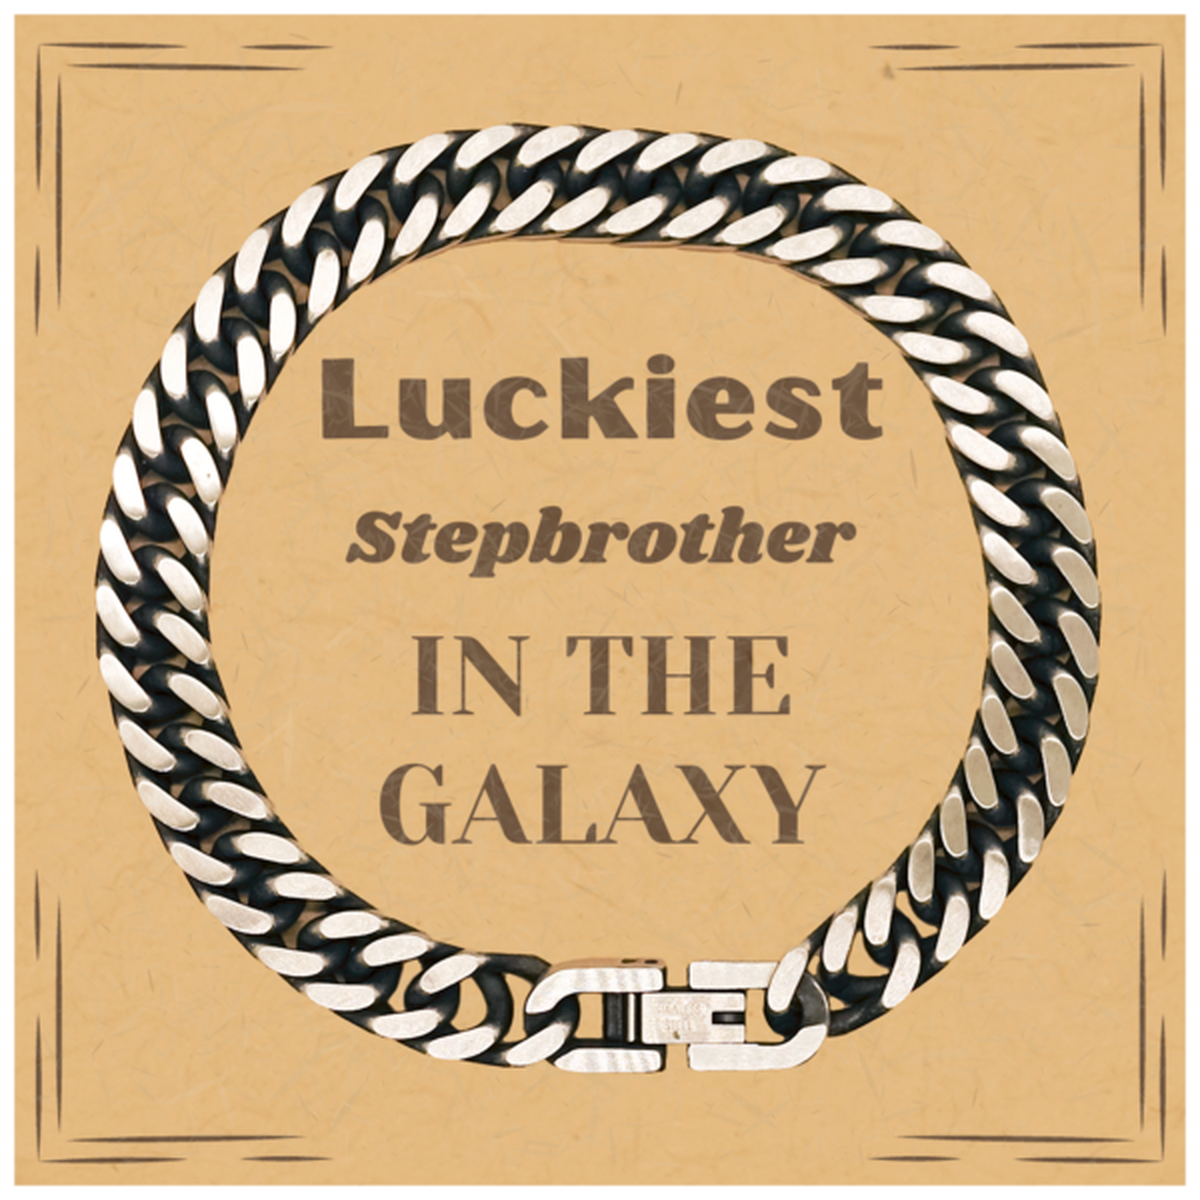 Luckiest Stepbrother in the Galaxy, To My Stepbrother Message Card Gifts, Christmas Stepbrother Cuban Link Chain Bracelet Gifts, X-mas Birthday Unique Gifts For Stepbrother Men Women